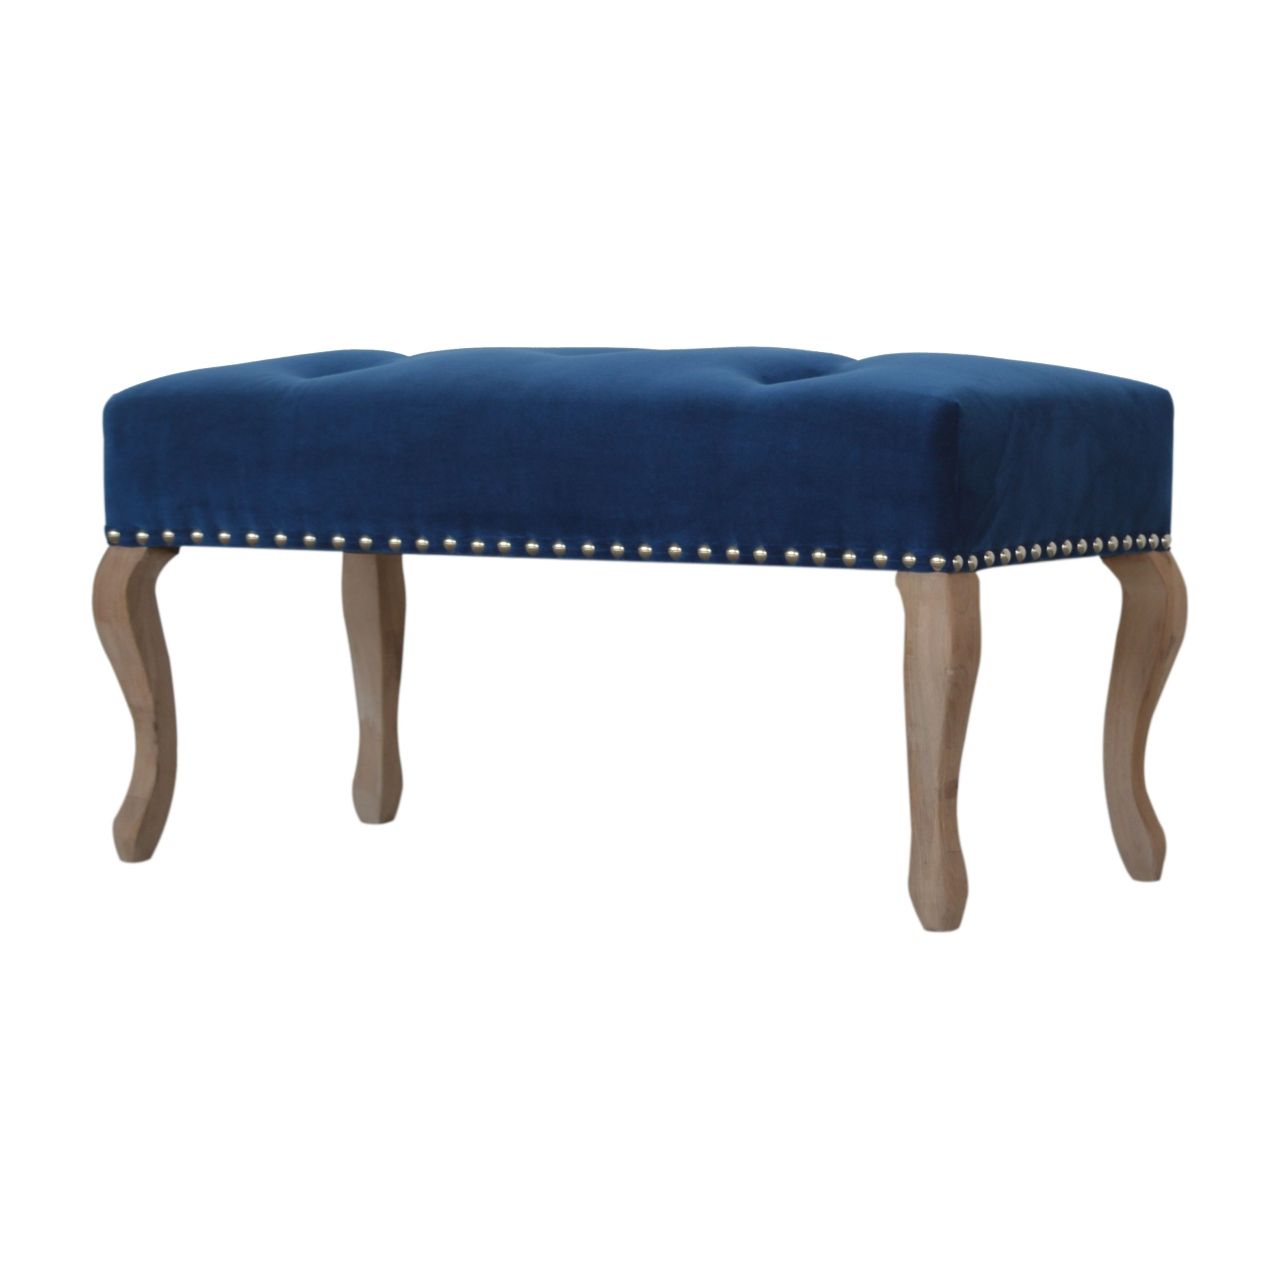 Artisan Blue Sofas With Regard To Most Current Wholesale French Style Royal Blue Velvet Bench, Dropship (View 15 of 15)